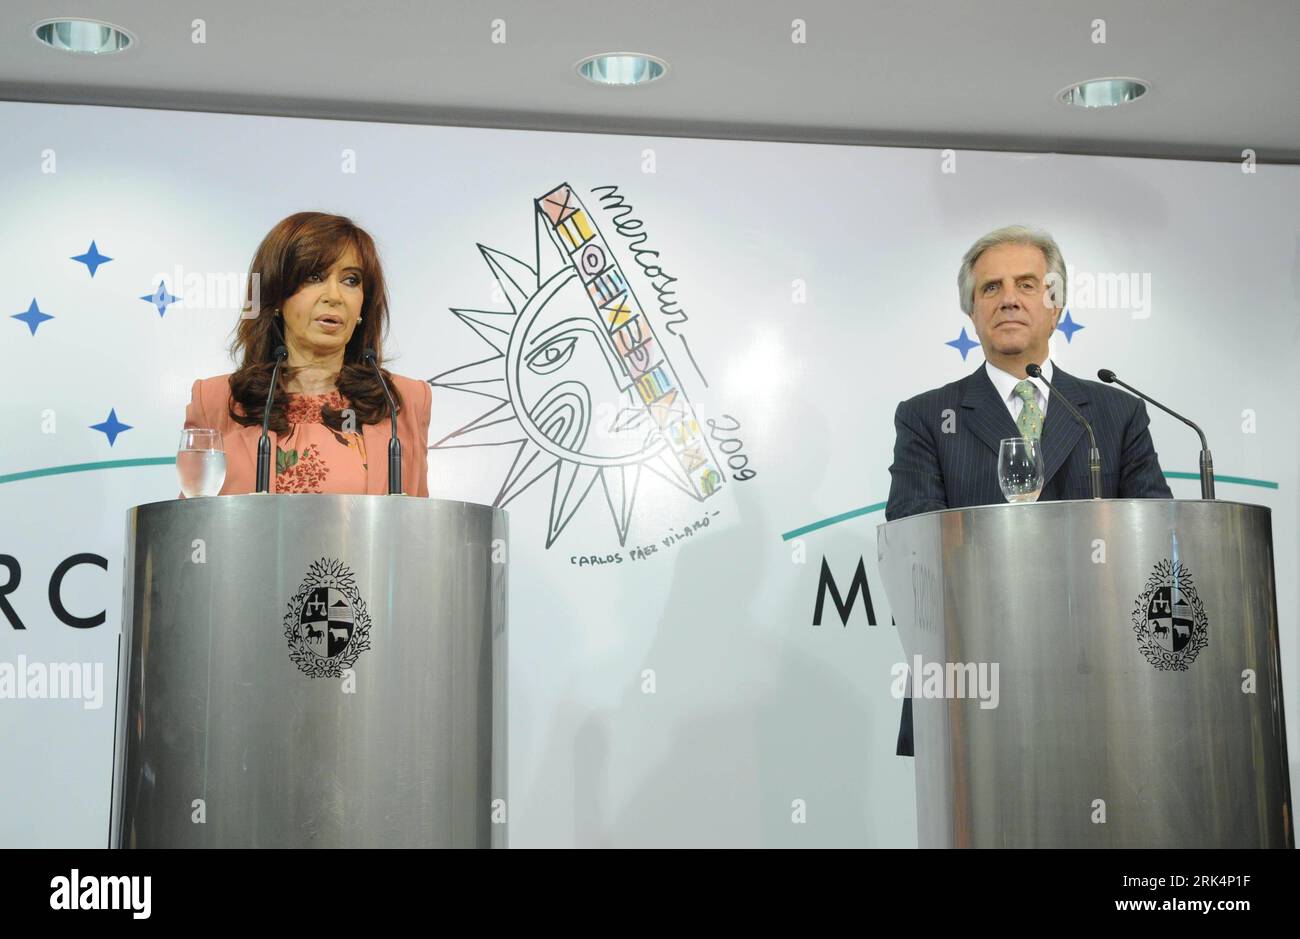 Bildnummer: 53655142  Datum: 08.12.2009  Copyright: imago/Xinhua (091209) -- MONTEVIDEO, Dec. 9, 2009 (Xinhua) -- Argentine President Cristina Fernandez de Kirchner (L) and her Uruguayan counterpart Tabare Vazquez attend a press conference after the presidential meeting of the Mercosur Summit in Montevideo, Uruguay, Dec. 8, 2009. The Common Market of the South (Mercosur) summit finished Tuesday with few results achieved on regional trade issues but with vows to push for a free trade agreement with the European Union (EU). (Xinhua/Nicolas Celaya) (yc) (3)URUGUAY-MERCOSUR-SUMMIT PUBLICATIONxNOTx Stock Photo